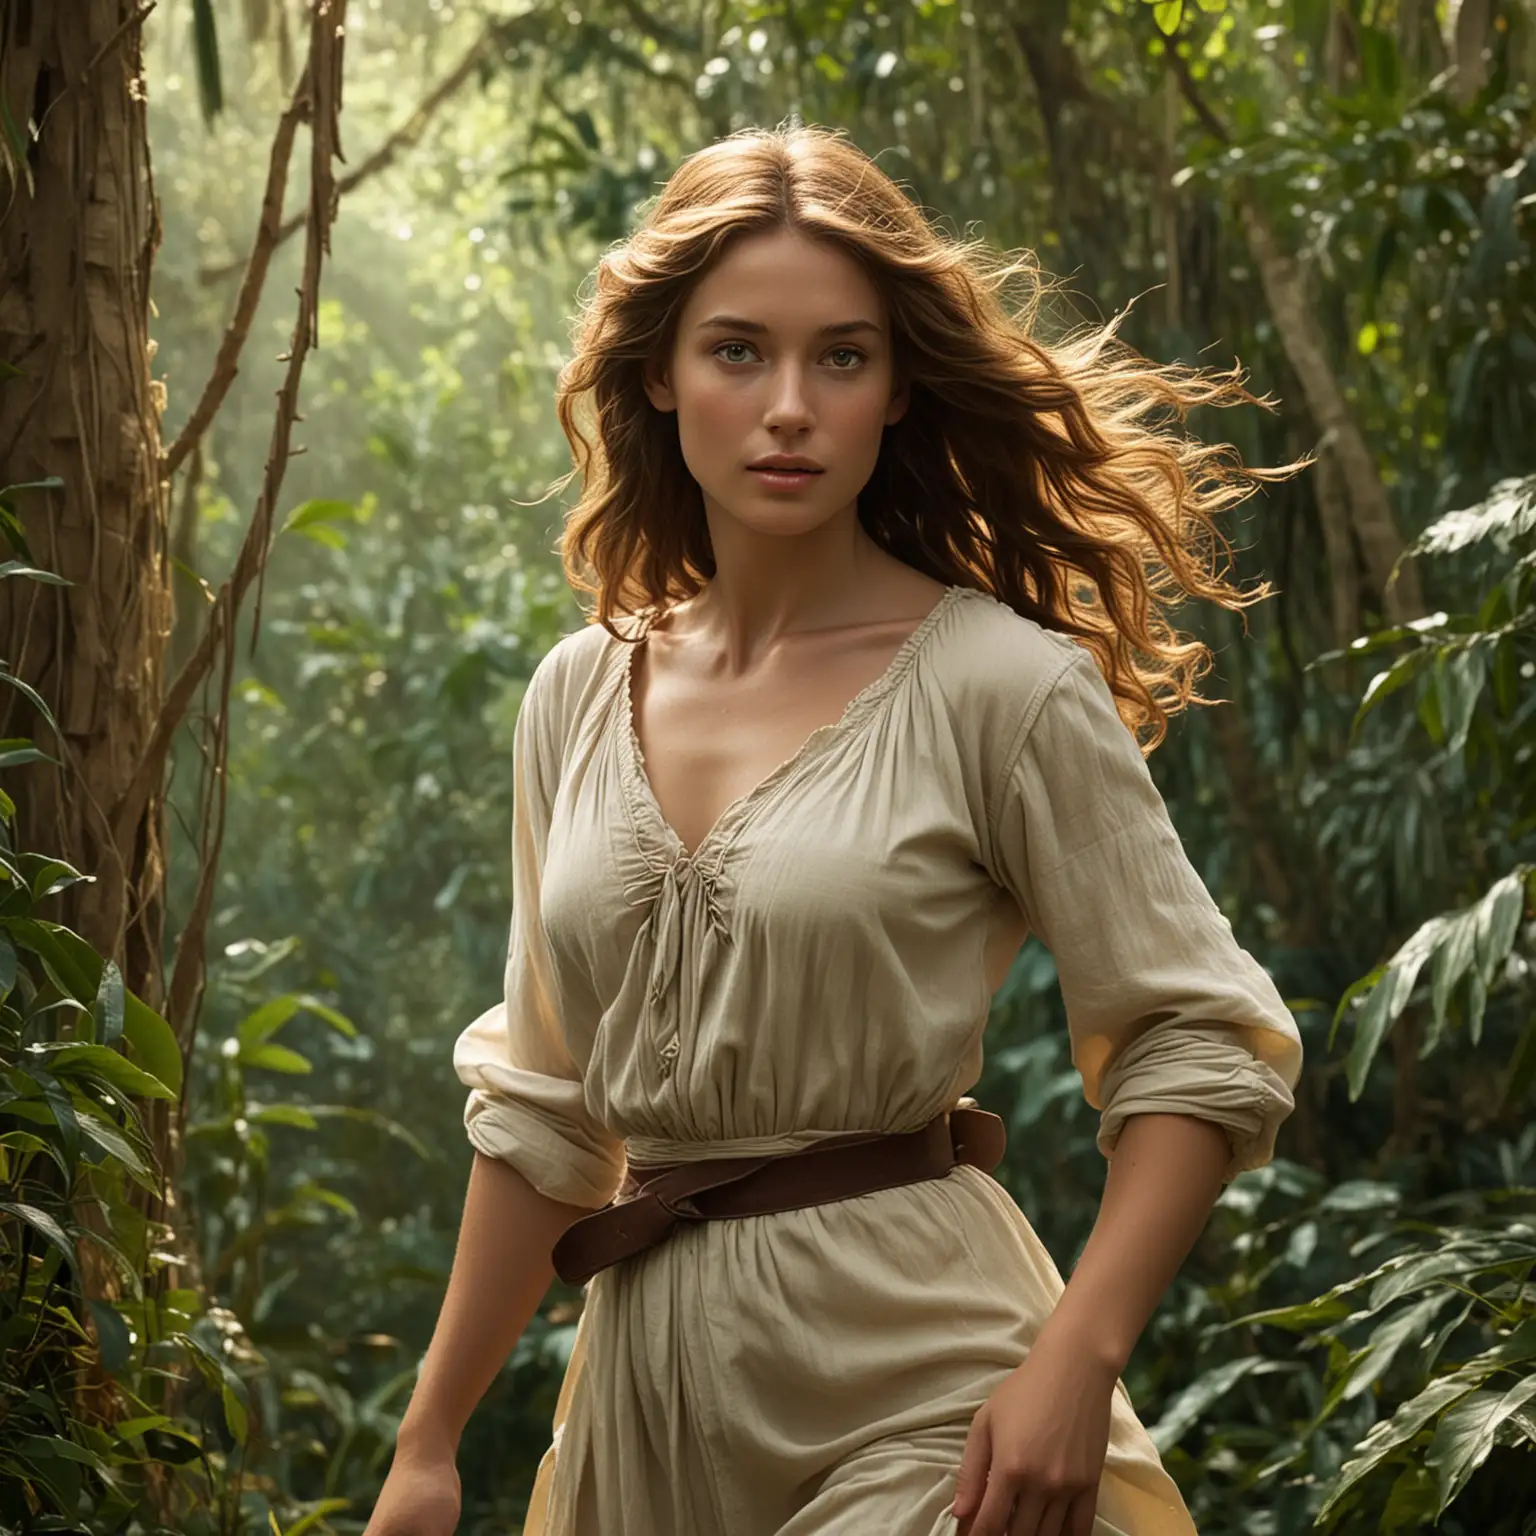 Jane, Tarzan's beloved companion and love interest, is often depicted as a woman of grace, intelligence, and compassion, contrasting with Tarzan's primal nature. Her appearance exudes a sense of refinement and gentility, reflecting her upbringing in a world far removed from the untamed jungles that Tarzan calls home.

Jane's face is typically portrayed as soft and delicate, with features that convey both innocence and curiosity. Her eyes are often depicted as bright and expressive, reflecting her keen intellect and adventurous spirit. Her complexion is fair and flawless, radiating a gentle glow that enhances her natural beauty.

Her hair, usually styled in a modest yet elegant manner, frames her face in waves of chestnut or golden locks, adding to her timeless charm. Jane's attire reflects her status as a woman of privilege, often consisting of tailored dresses or blouses paired with skirts, reflecting the fashion of the era in which she lives. Despite the practicalities of jungle life, Jane's clothing retains an air of sophistication, with delicate fabrics and feminine details that speak to her refined sensibilities.

Overall, Jane's physical appearance embodies a blend of beauty, grace, and strength, making her a fitting counterpart to Tarzan's rugged masculinity and a captivating figure in her own right.